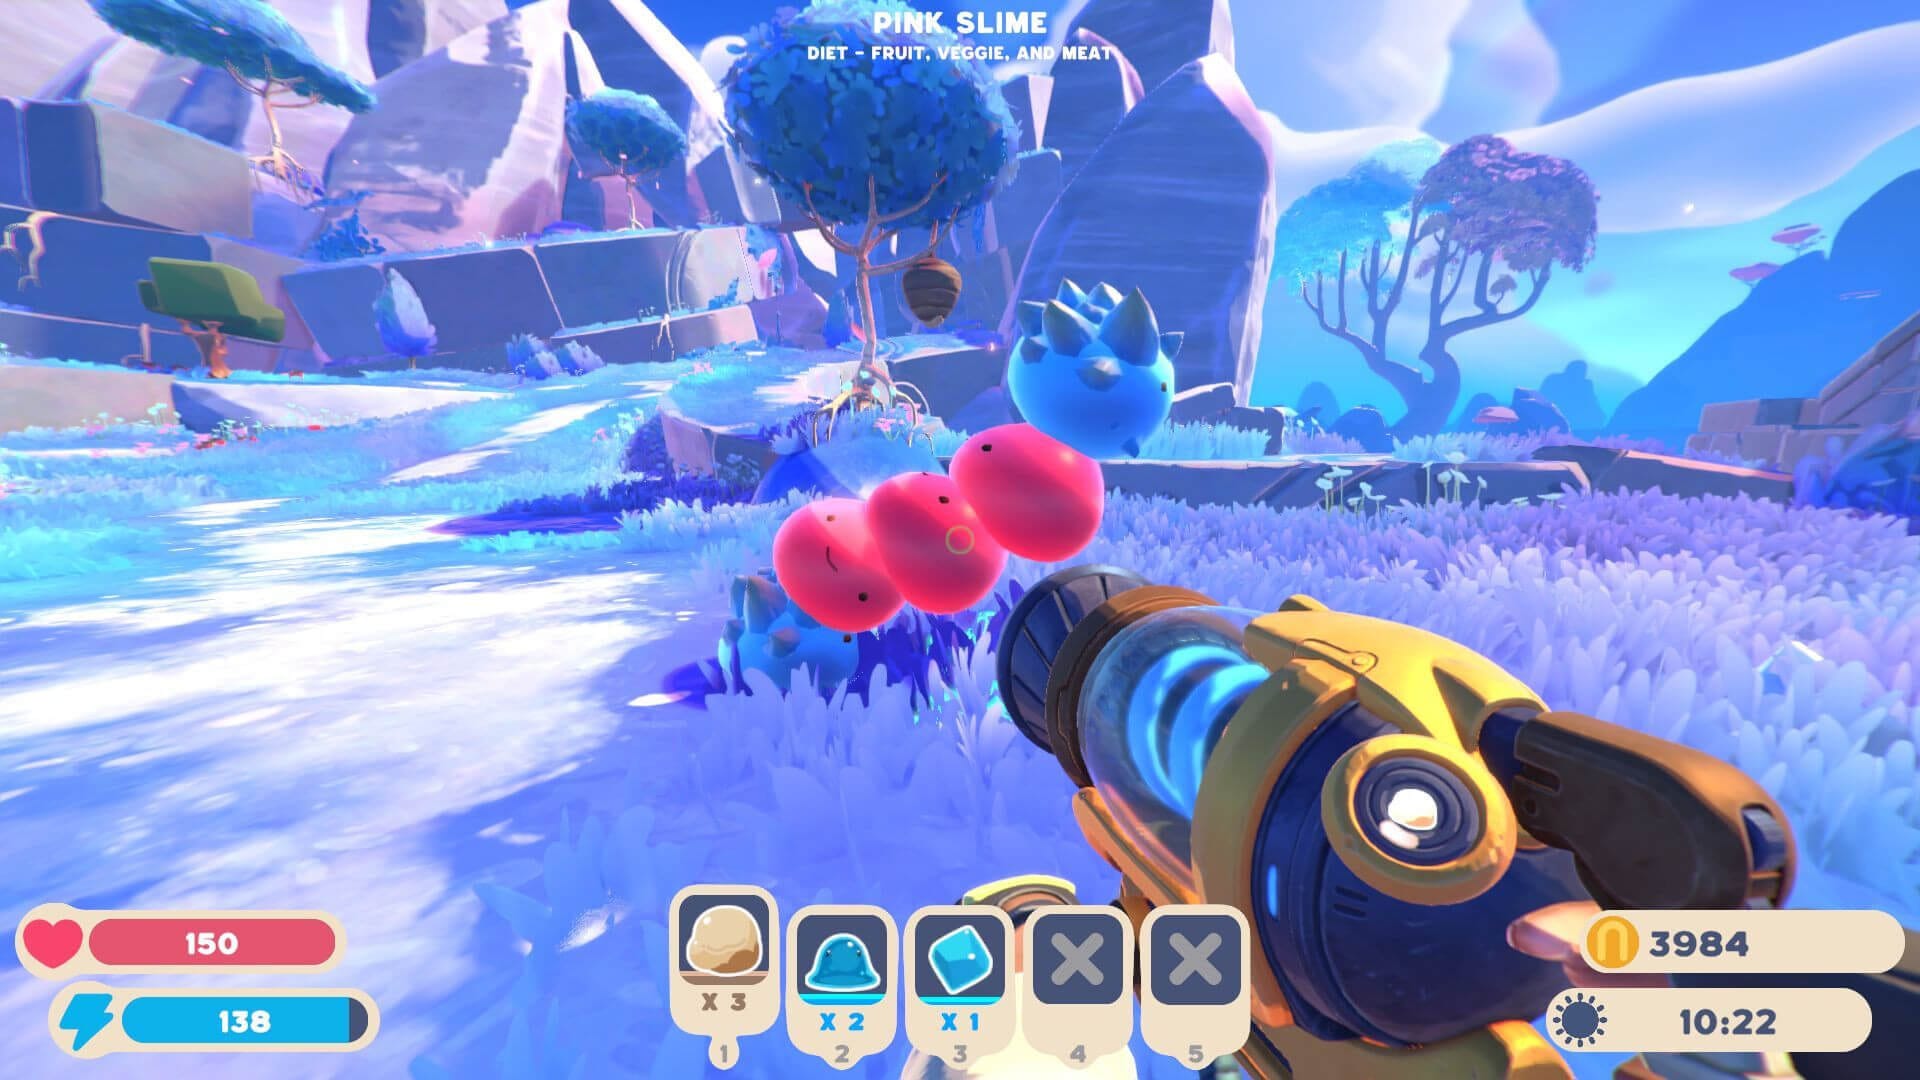 Slime Rancher 2 Multiplayer: Does It Have Co-op, Splitscreen, or